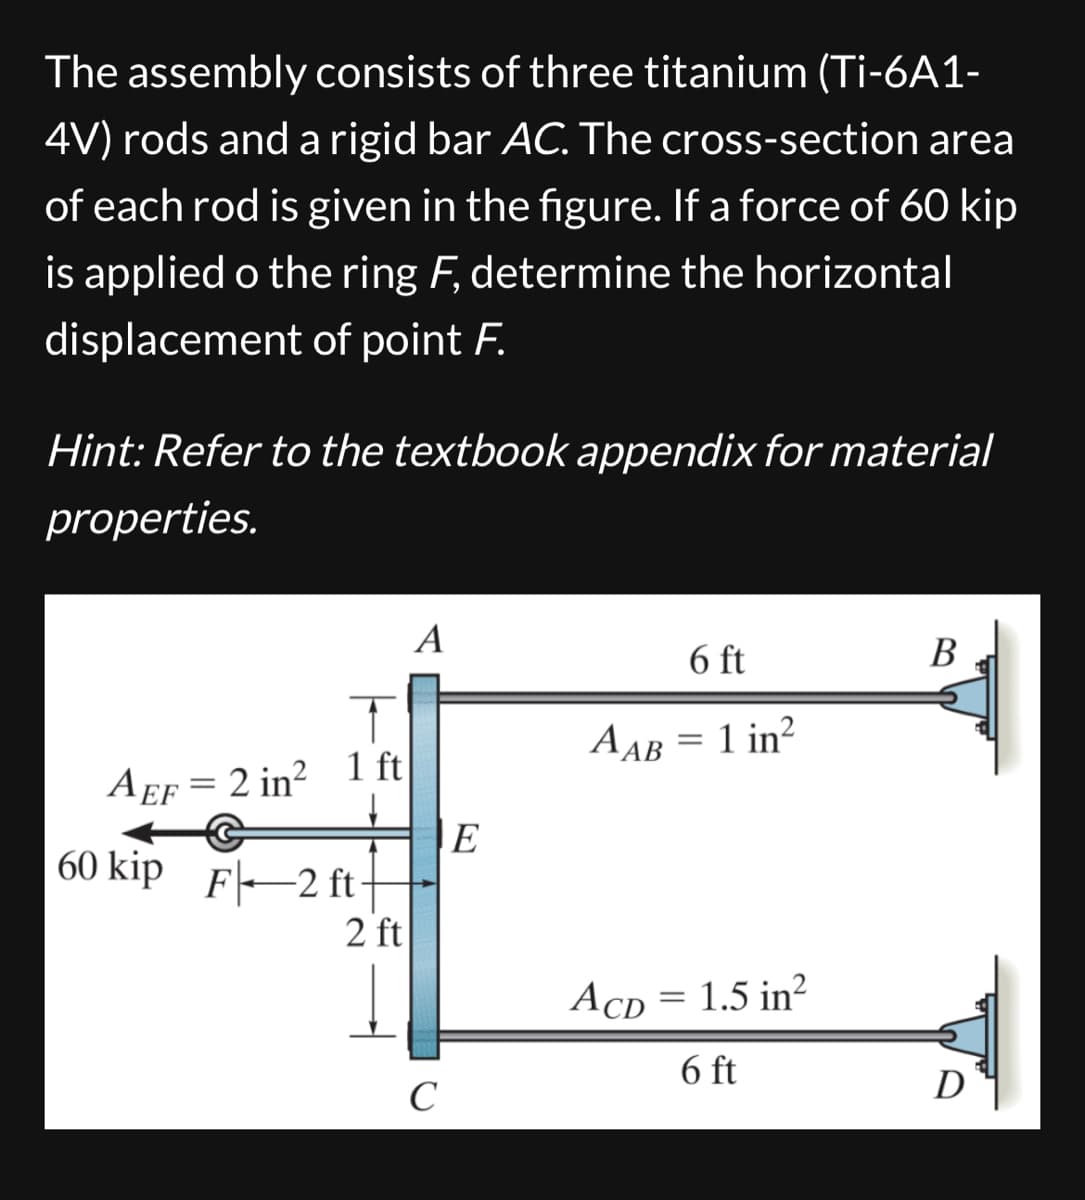 The assembly consists of three titanium (Ti-6A1-
4V) rods and a rigid bar AC. The cross-section area
of each rod is given in the figure. If a force of 60 kip
is applied o the ring F, determine the horizontal
displacement of point F.
Hint: Refer to the textbook appendix for material
properties.
AEF 2 in² 1 ft
=
60 kip F-2 ft-
2 ft
A
C
6 ft
B
AAB
=
1 in²
E
ACD = 1.5 in²
6 ft
D